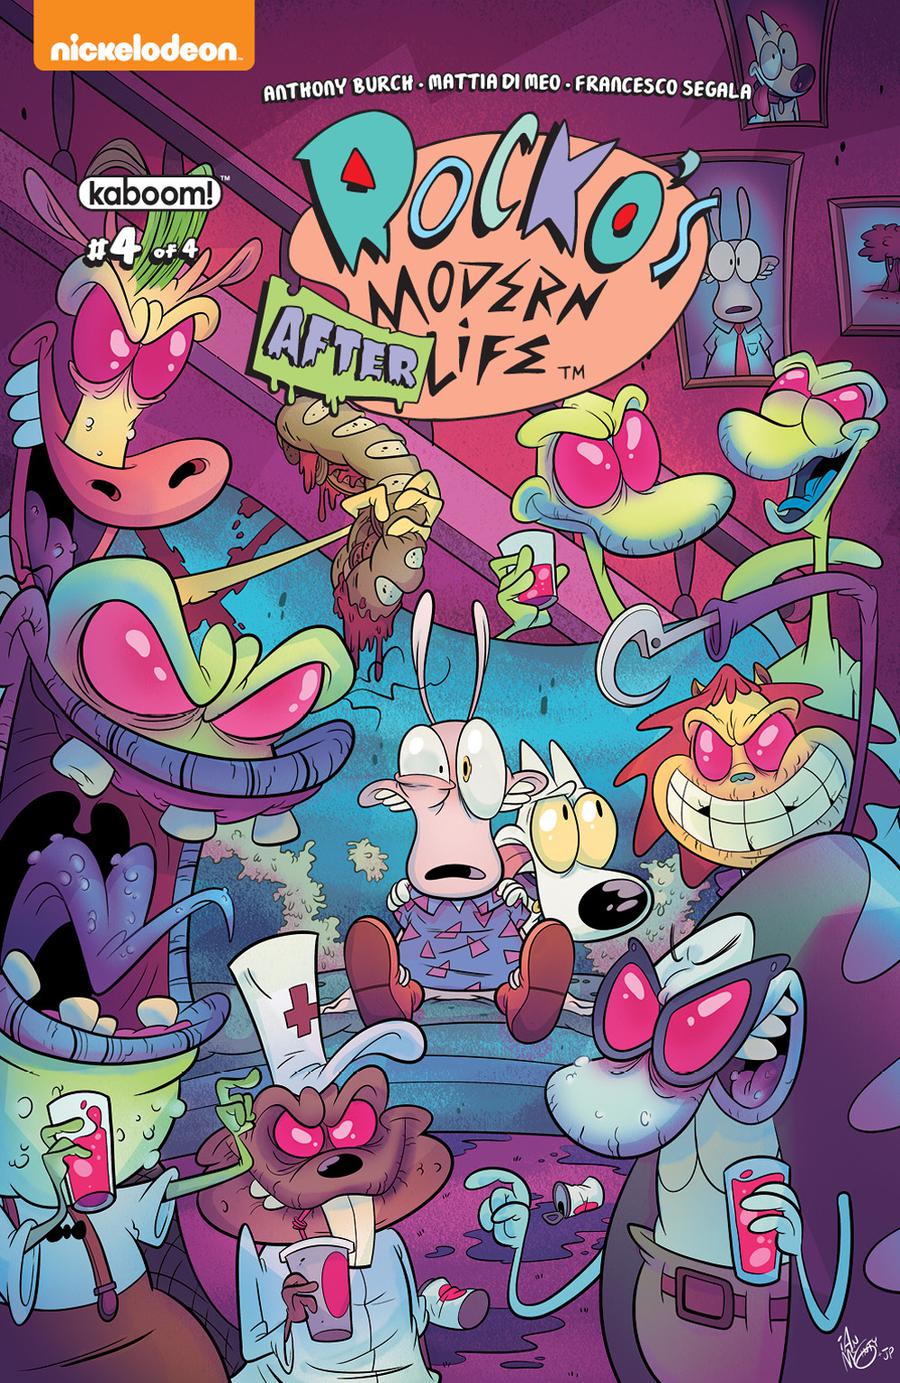 Rockos Modern Afterlife #4 Cover A Regular Ian McGinty Cover